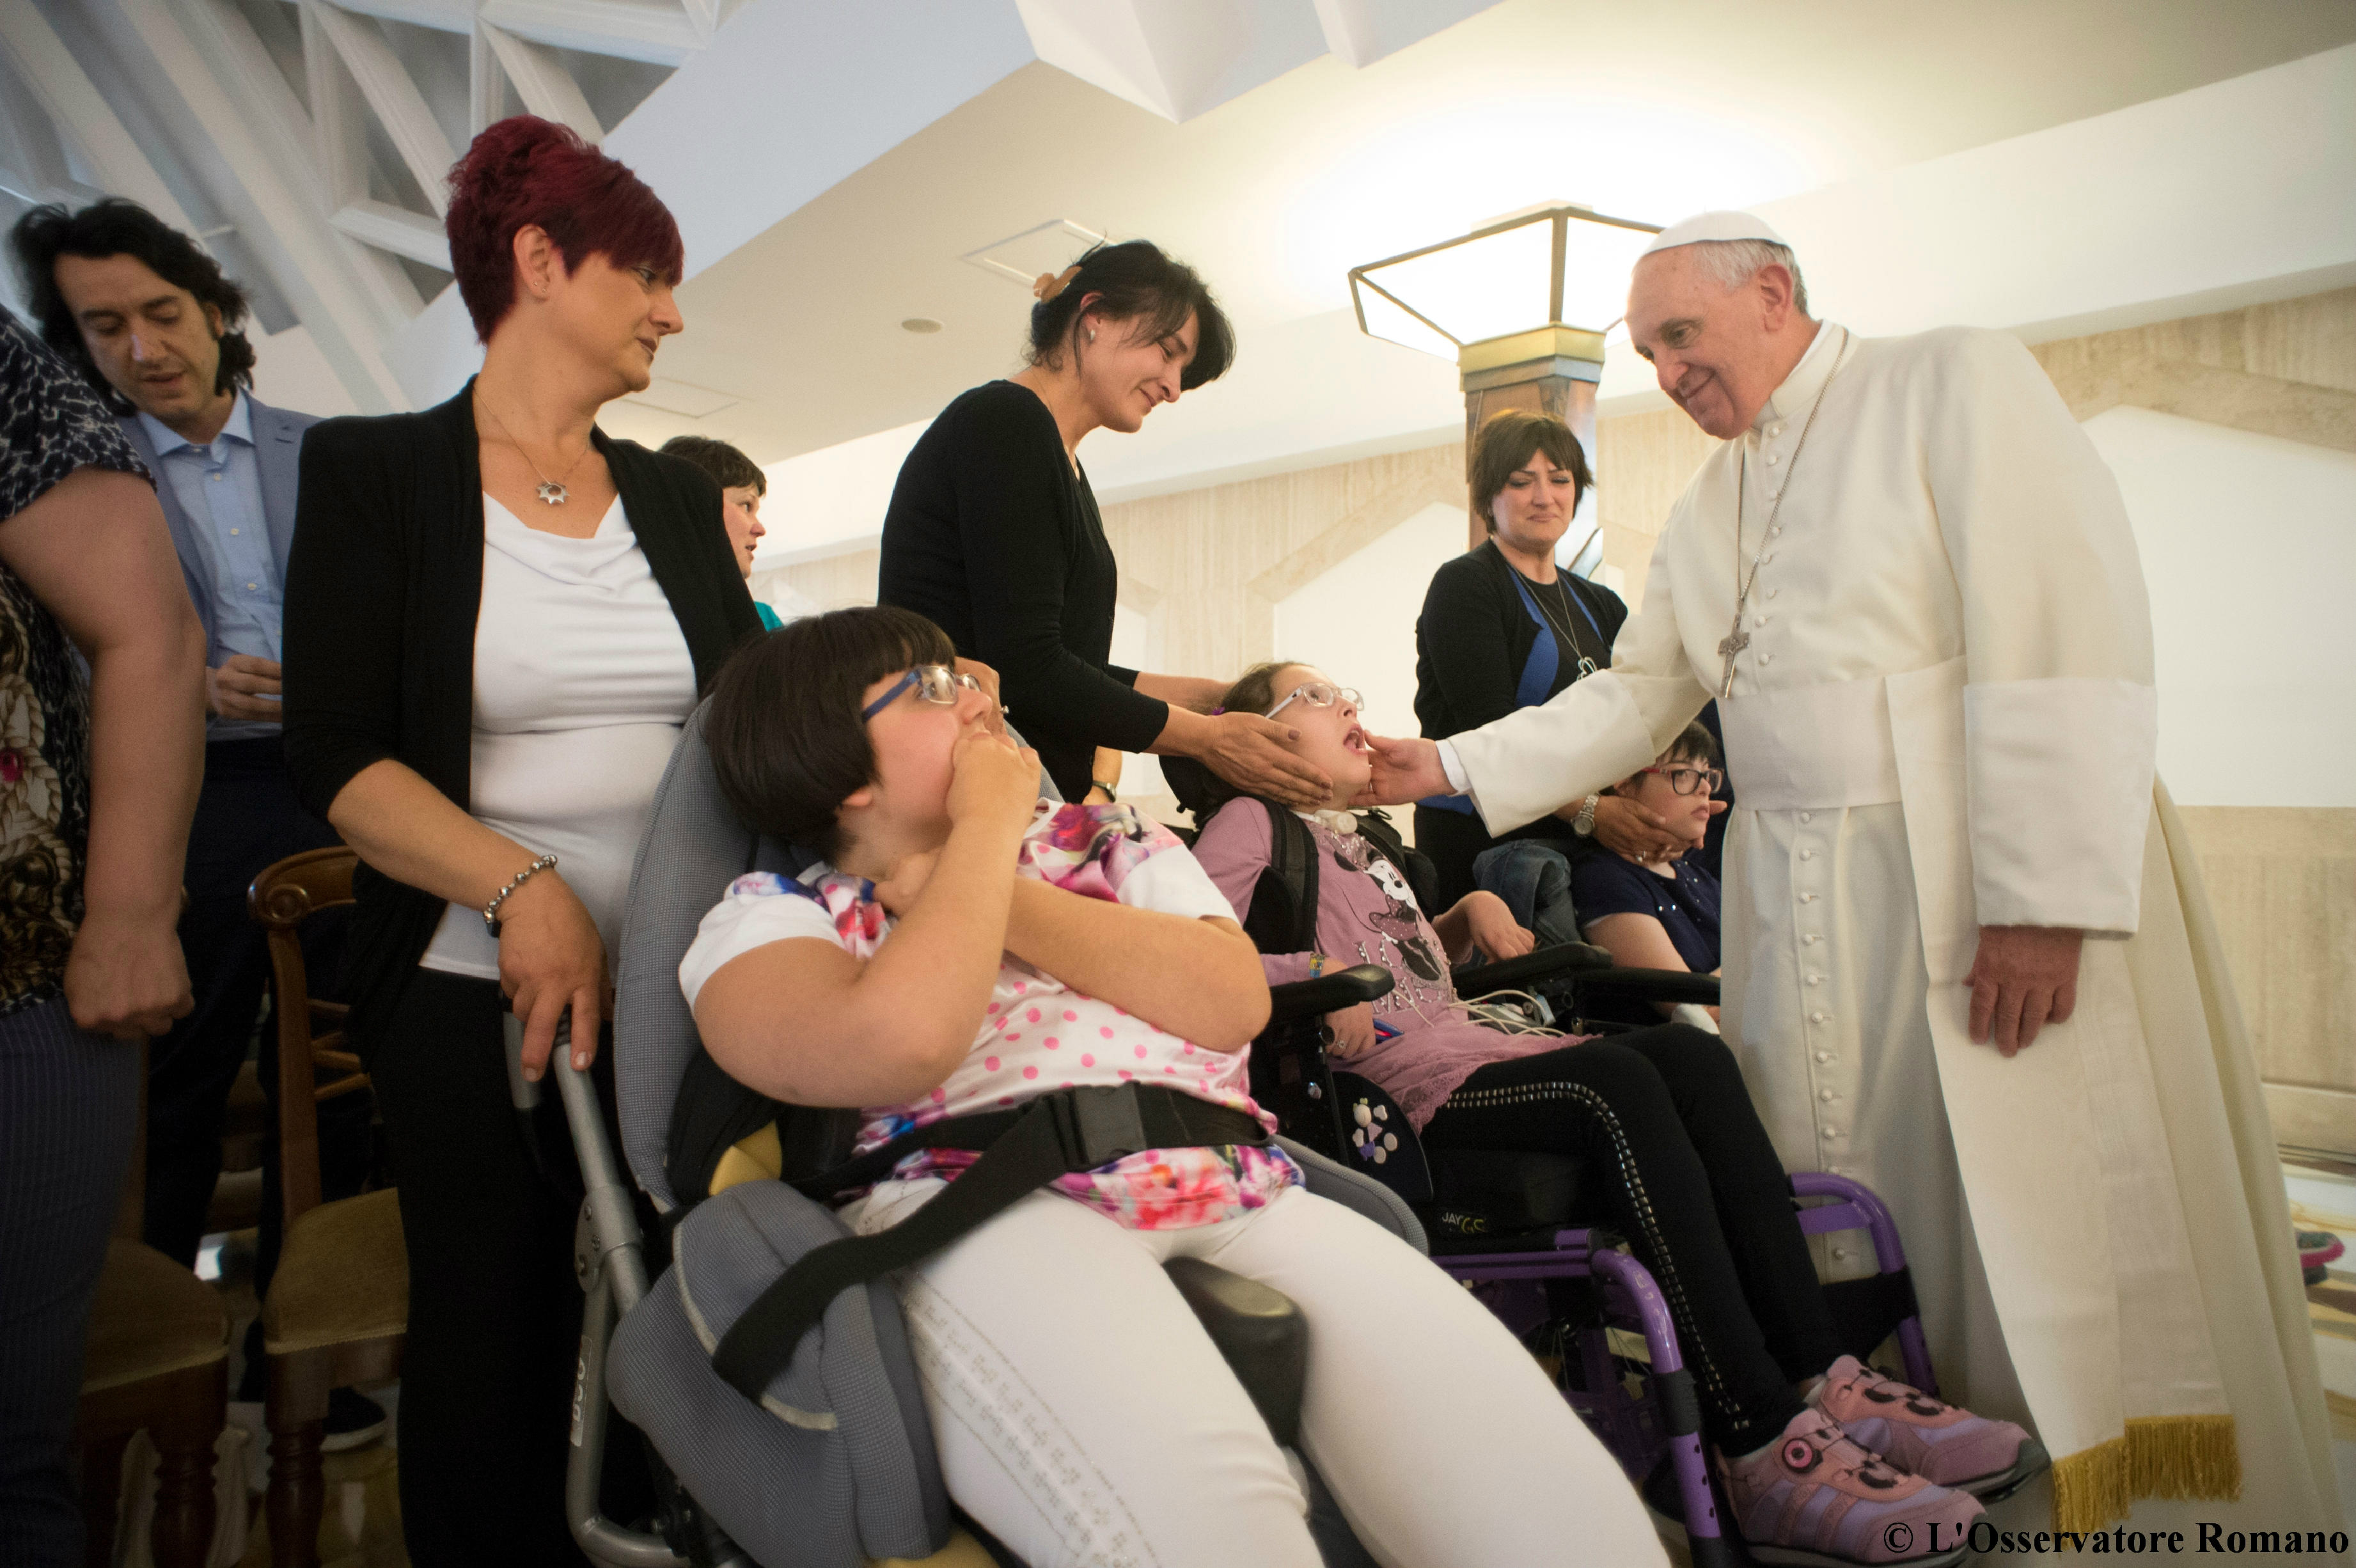 Pope Francis meets children from the Train of Joy